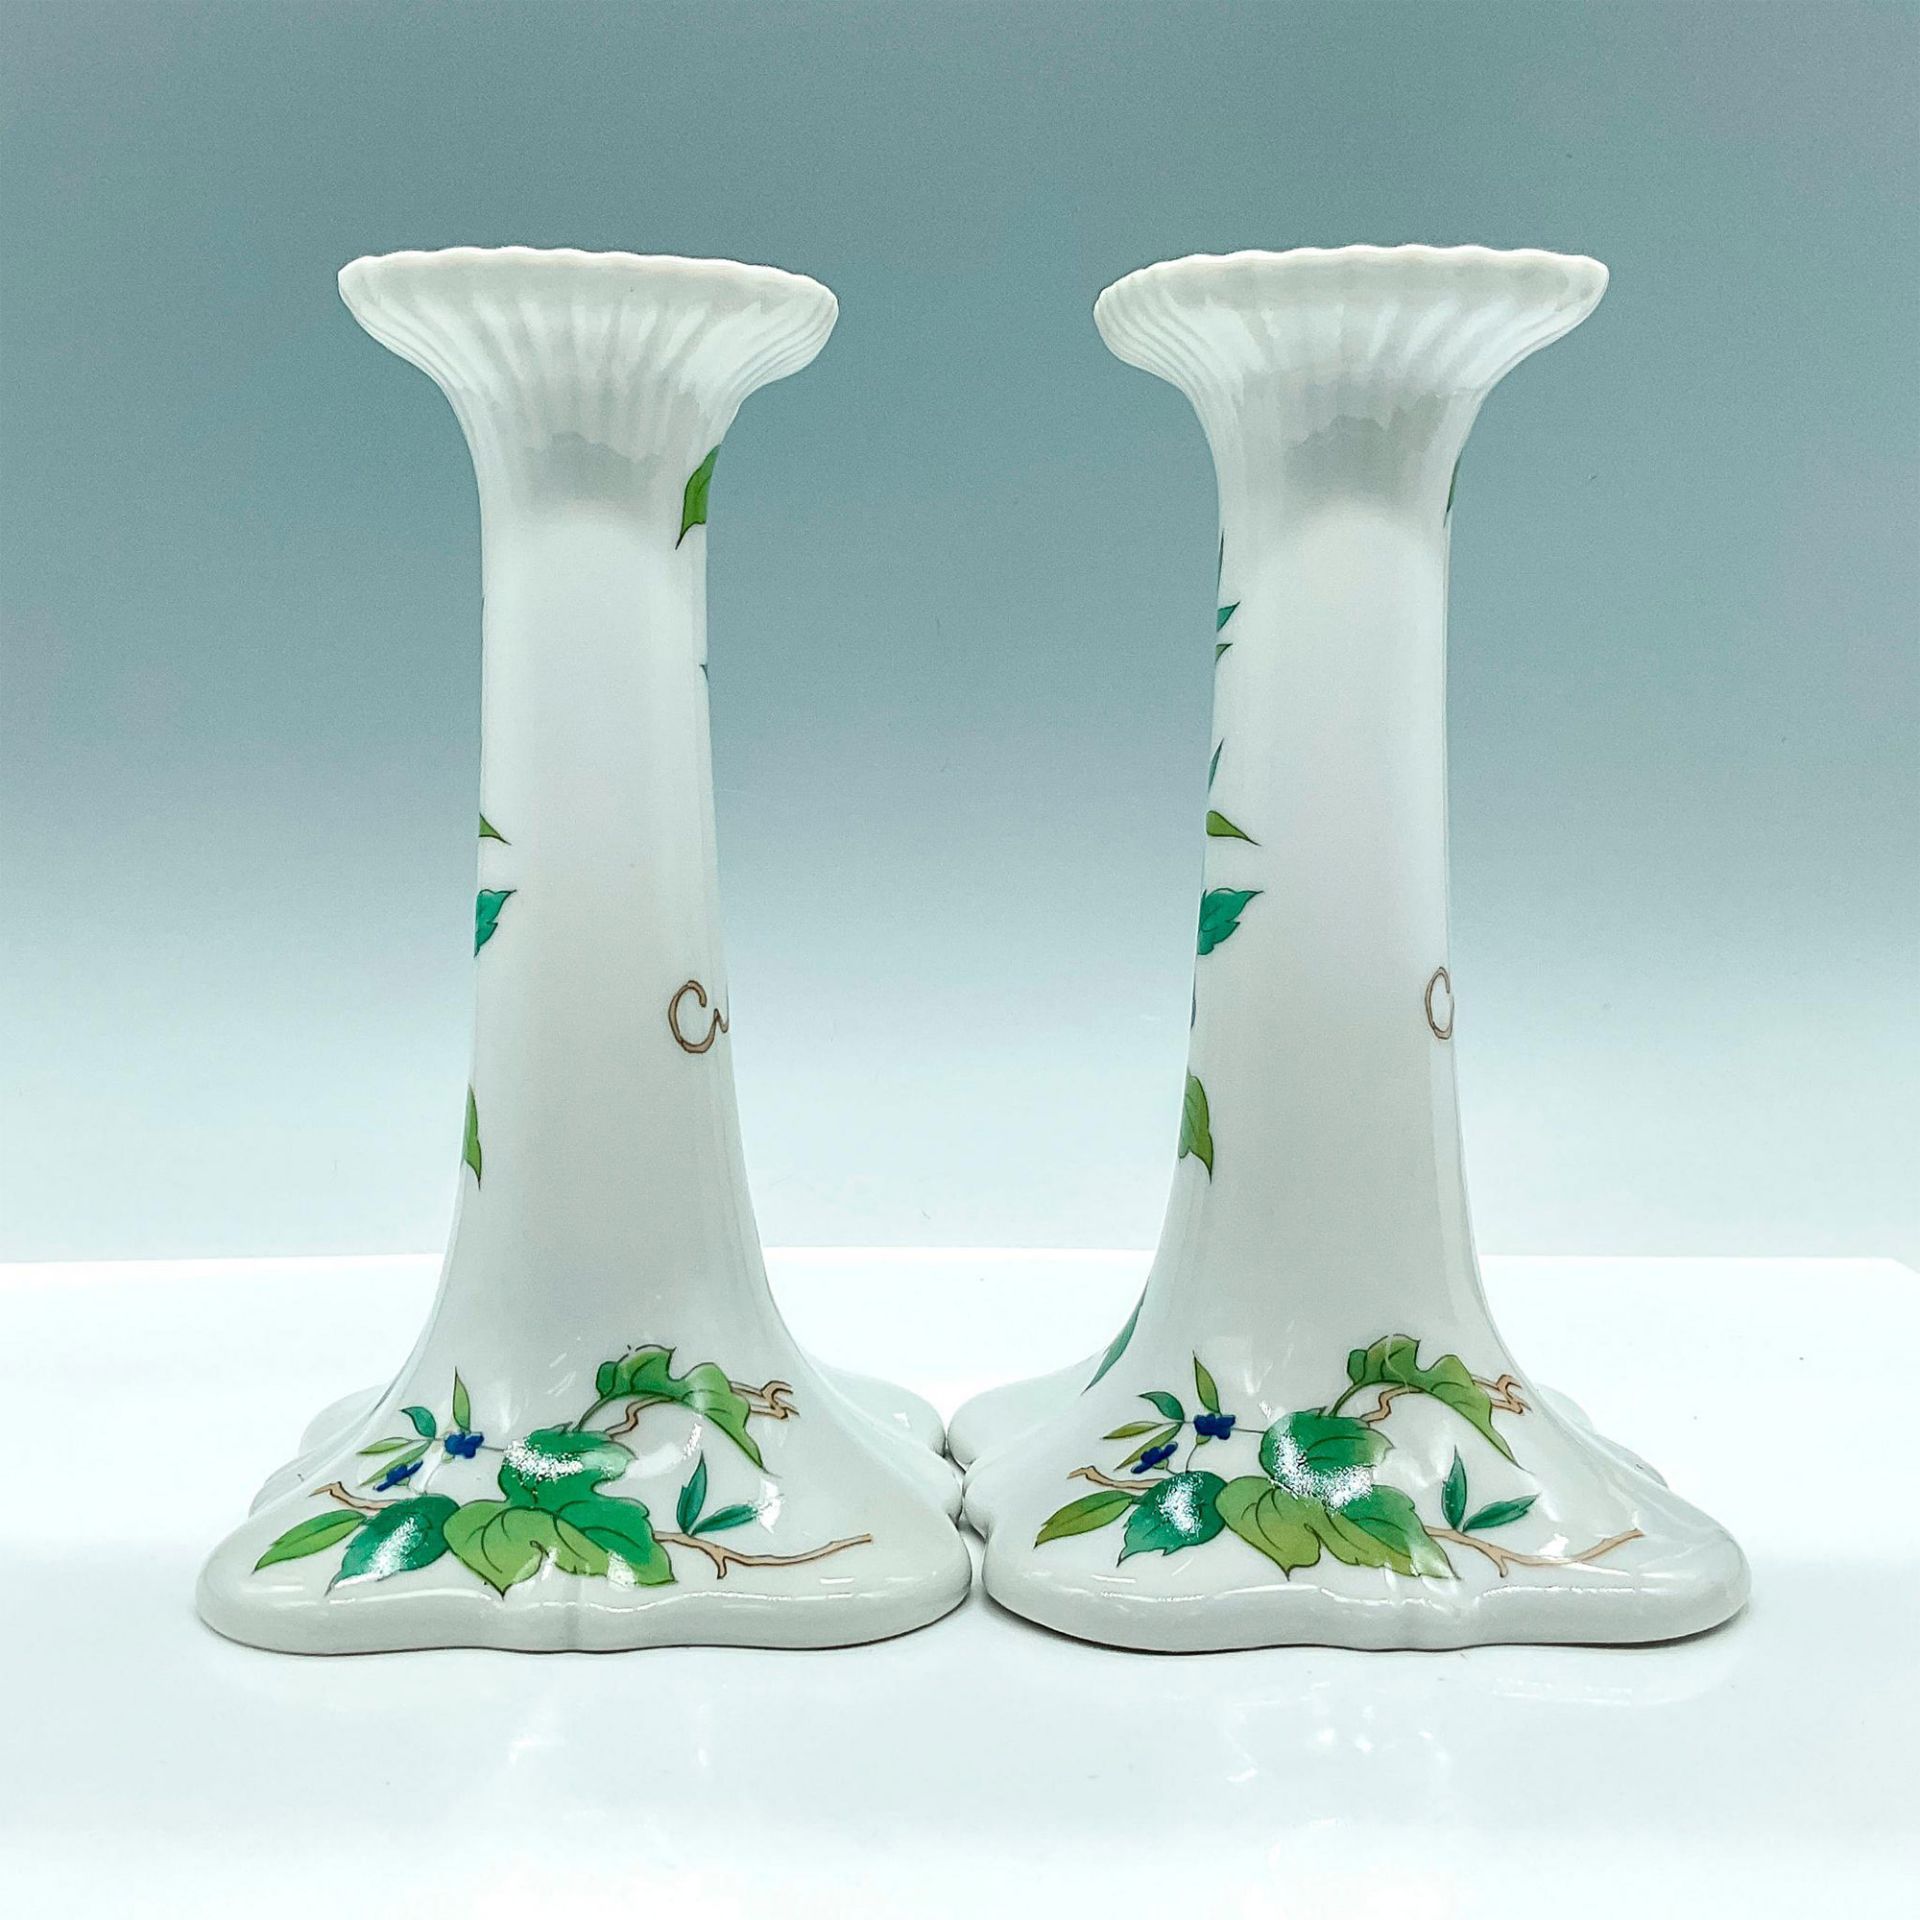 Pair of Mann Porcelain Candleholders, Morning Glory - Image 2 of 3